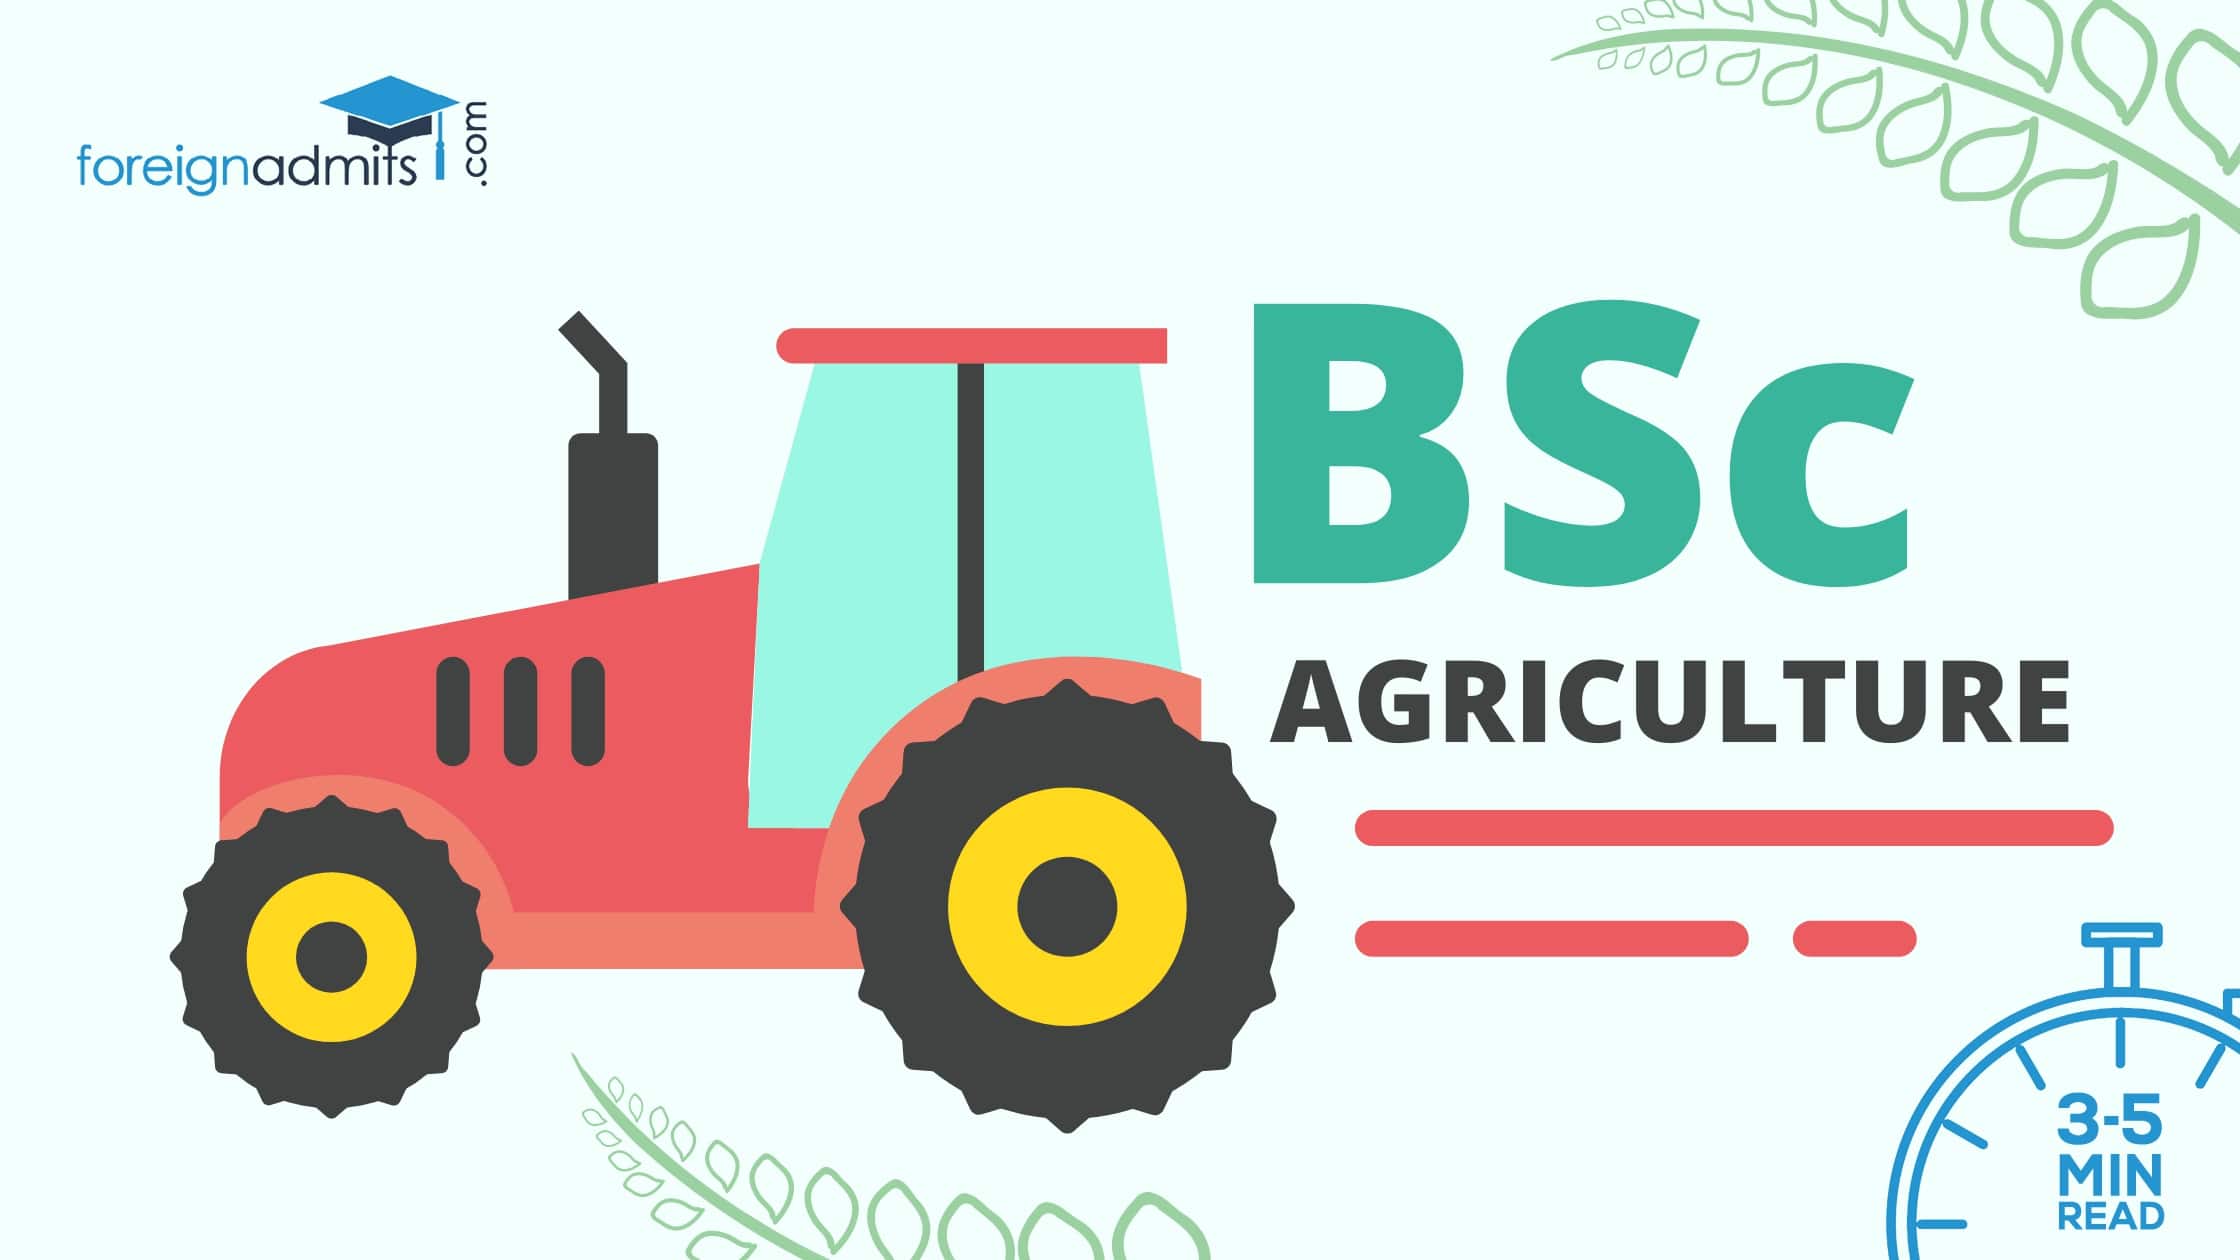 Everything You Need to Know About BSc Agriculture